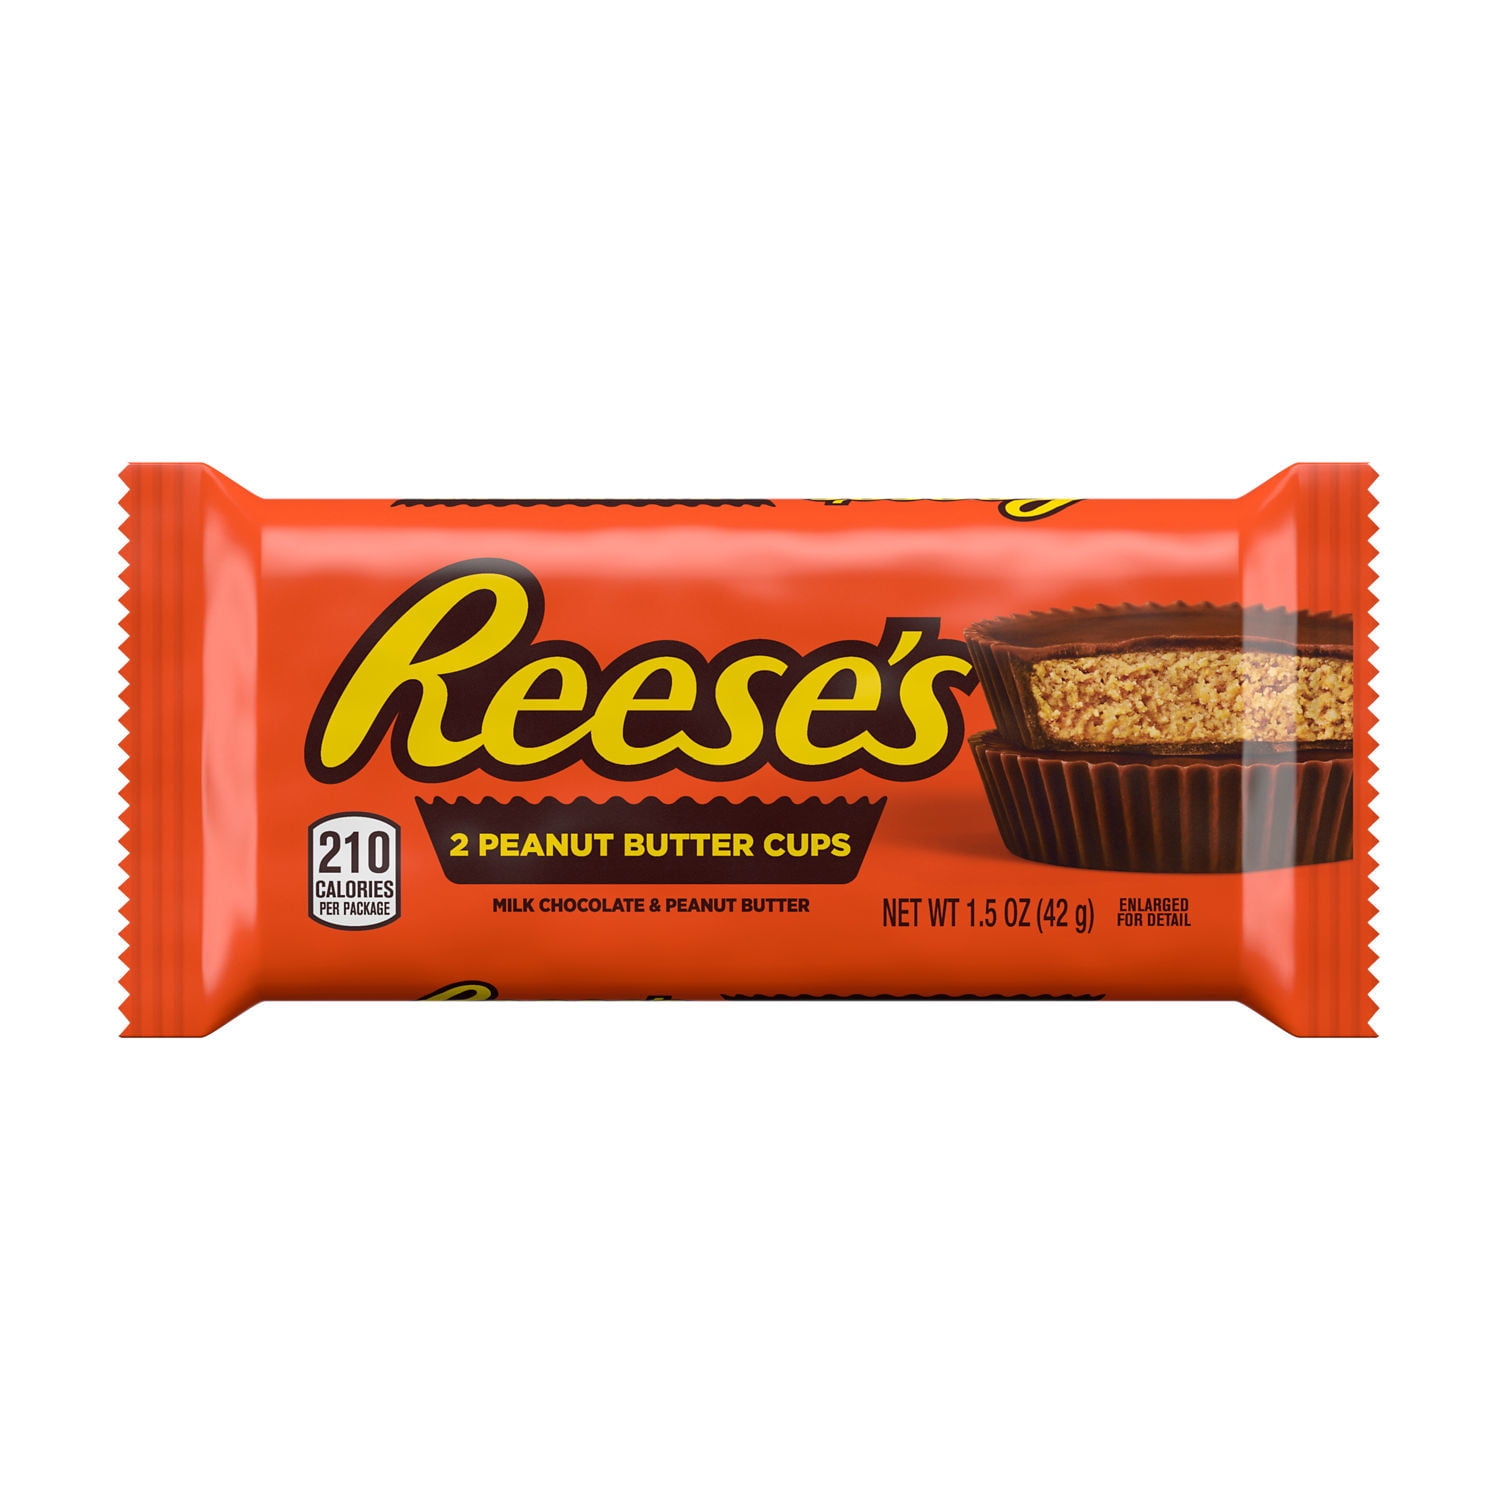 REESE'S, Milk Chocolate Peanut Butter Cups Candy, Gluten Free, 1.5 oz, Pack